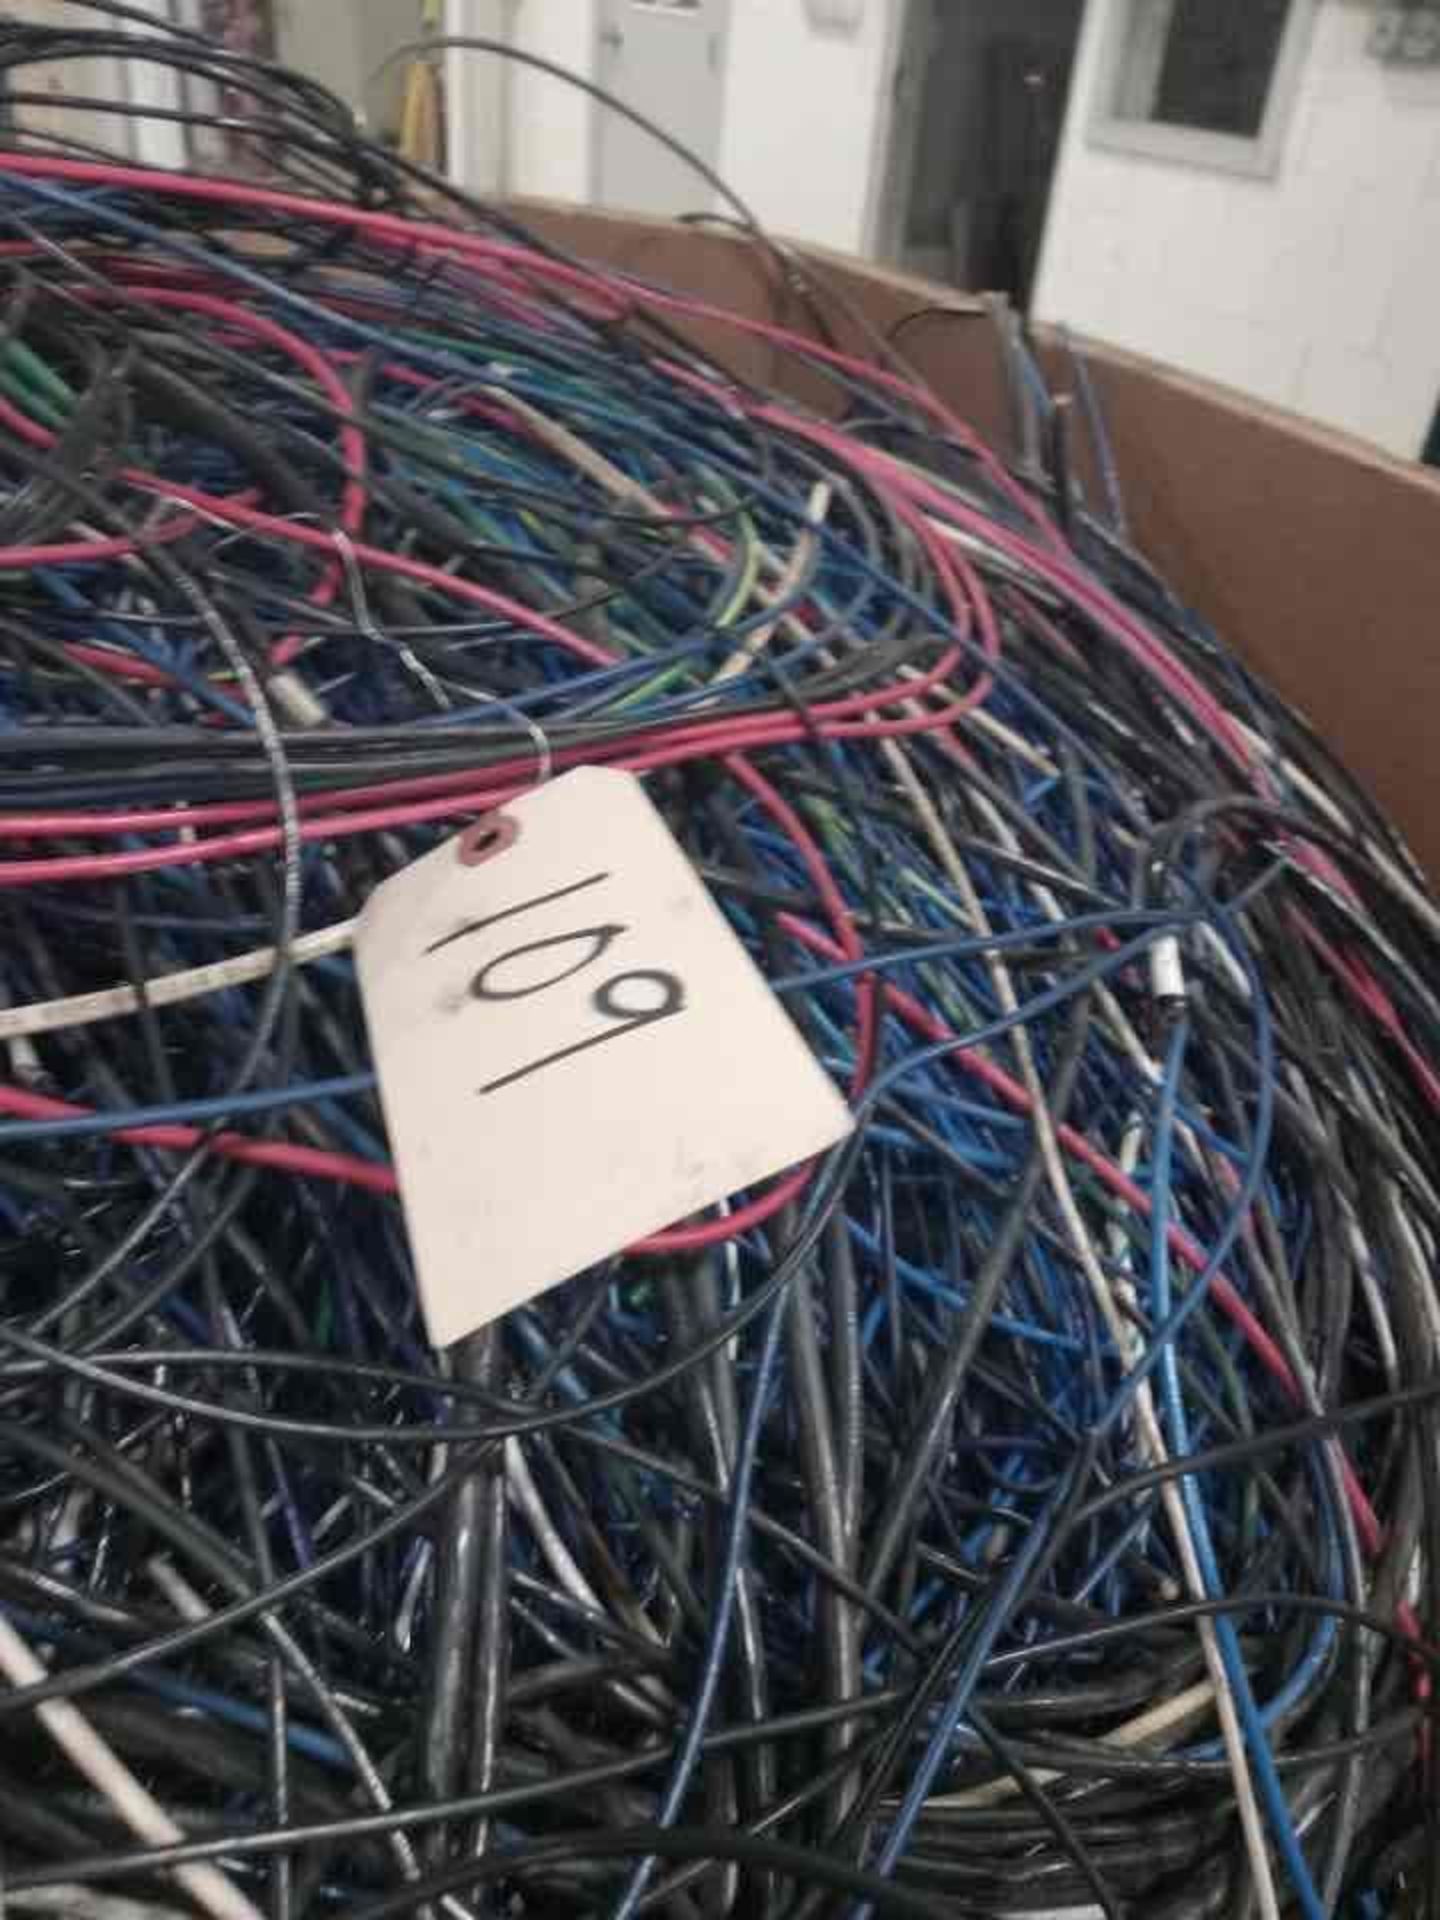 Scrap Wire (Single Wire) 1,556 Lbs. (Includes Tare Weight) - Image 7 of 7